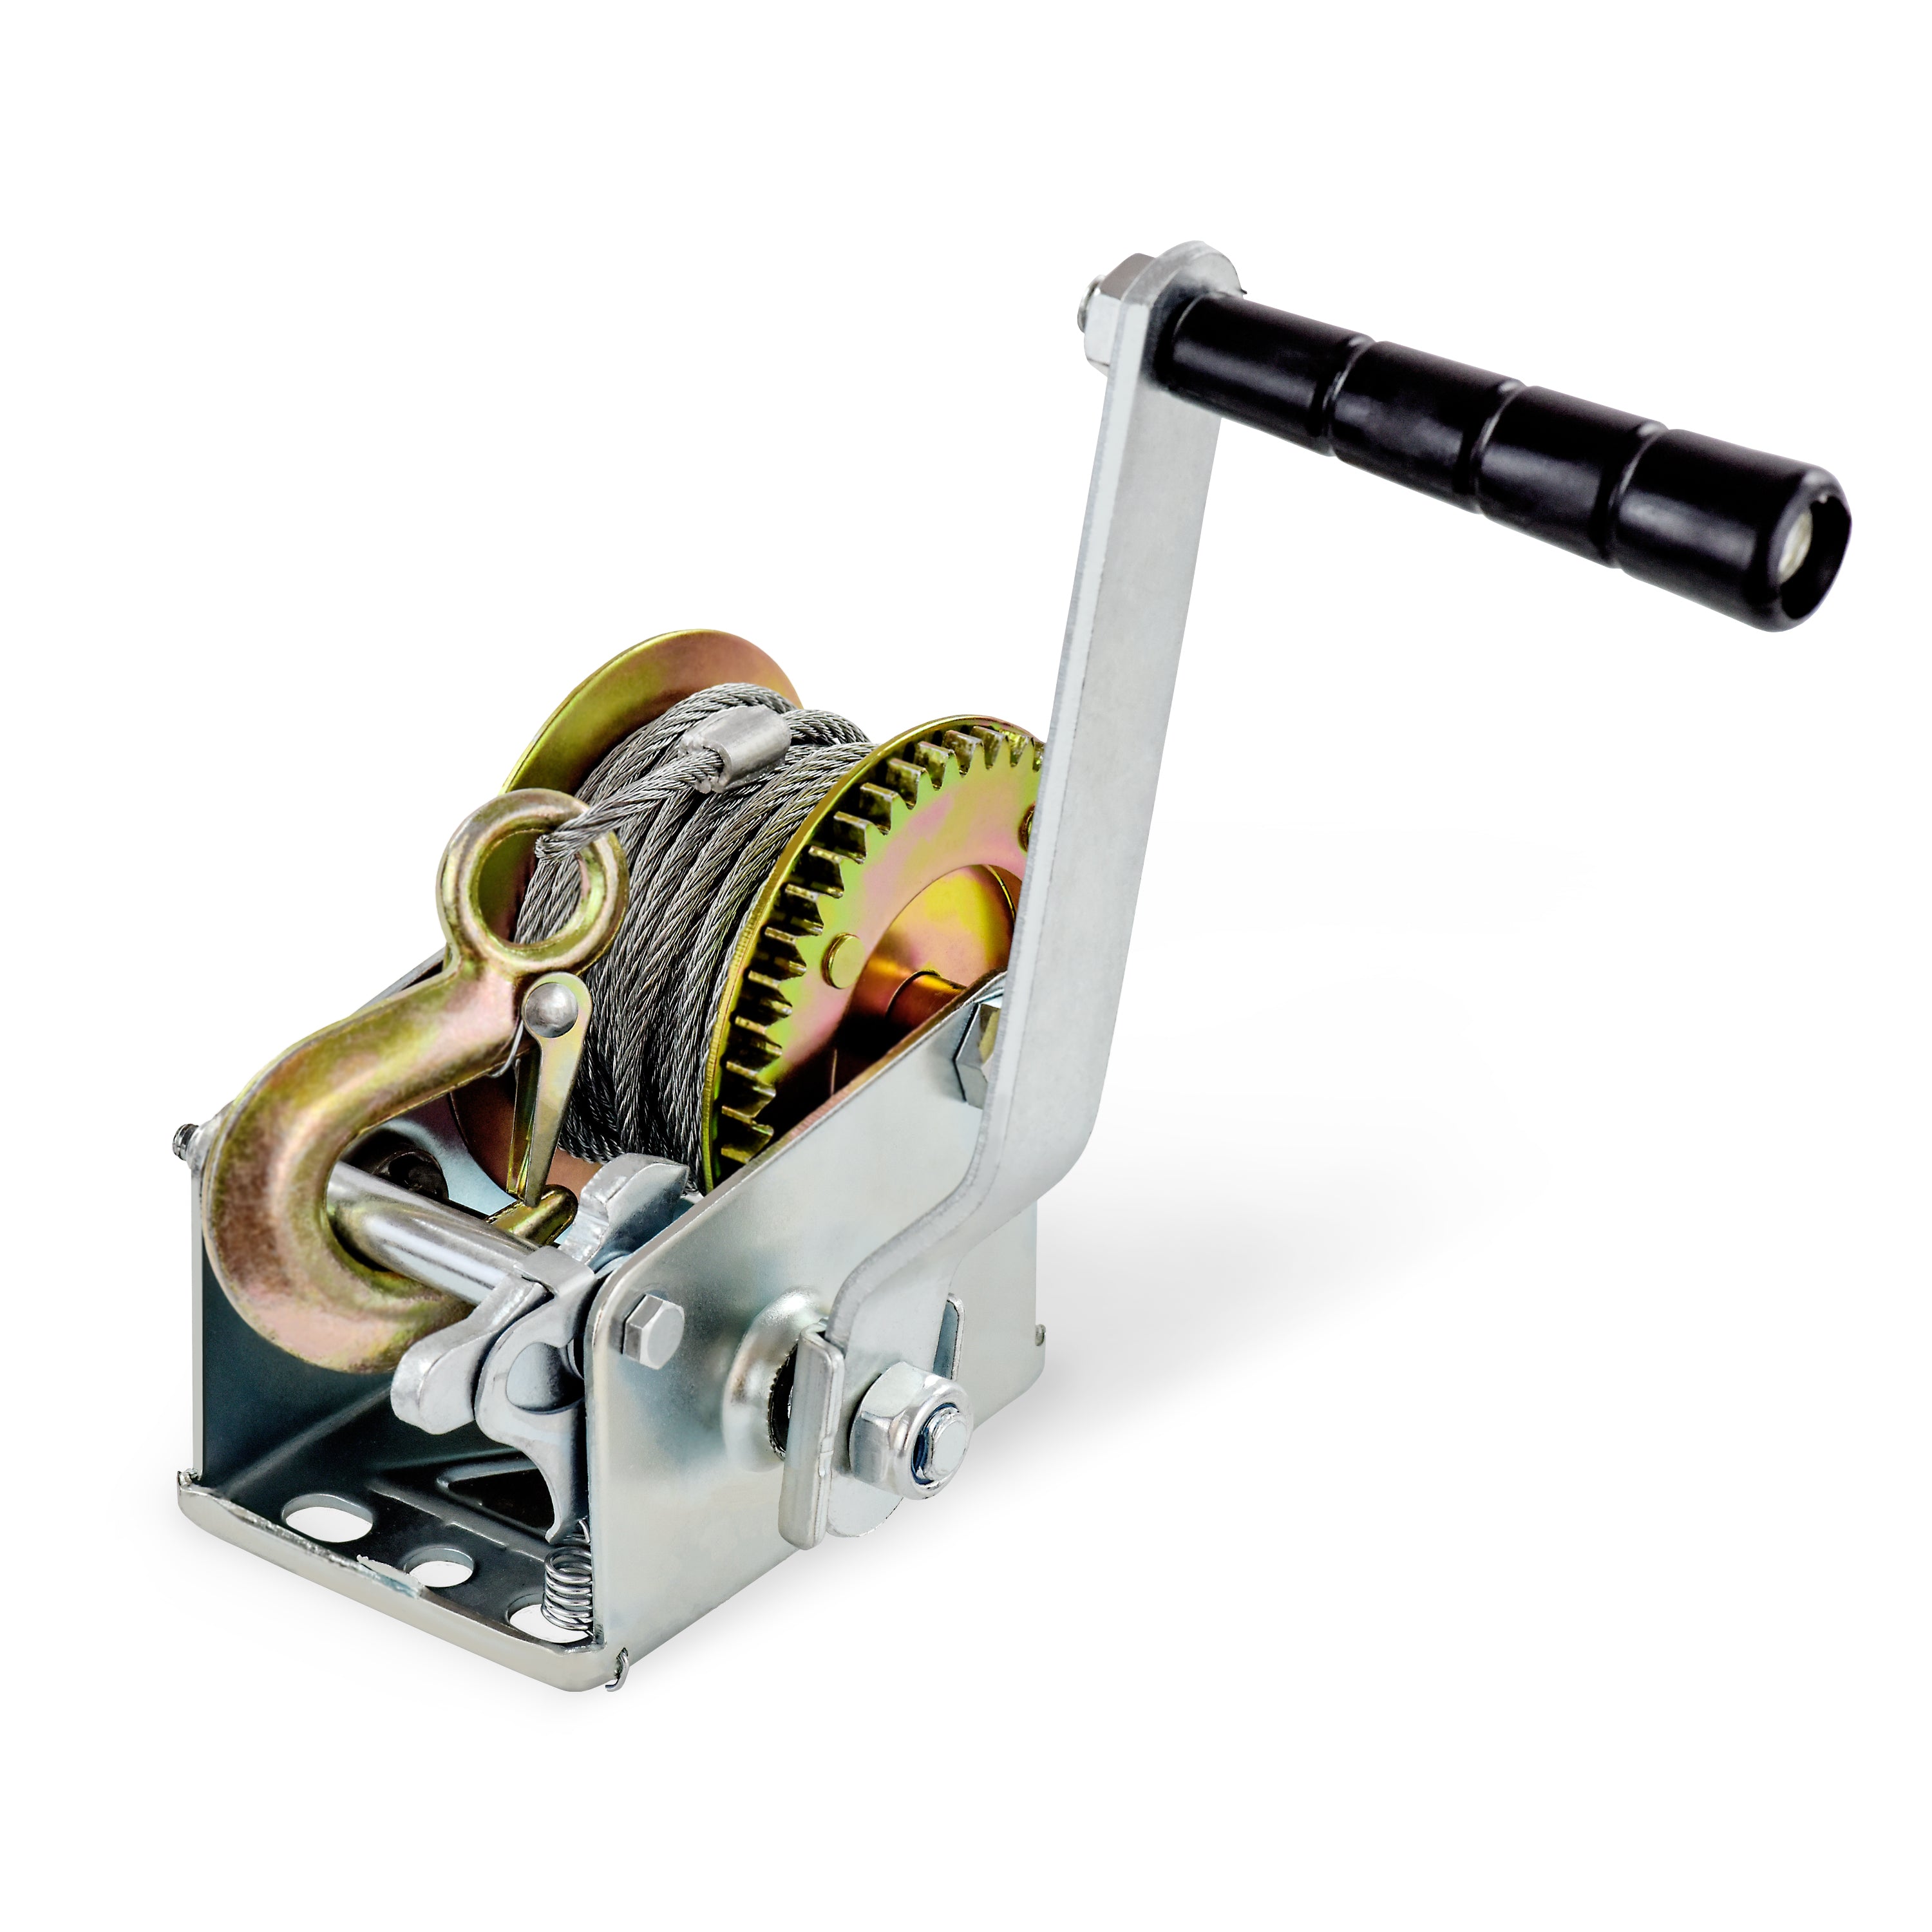 Segomo Tools Heavy Duty 600 Pound Manual, Two Way Ratchet 26.2 Foot Long Wire Hand Winch - HW600